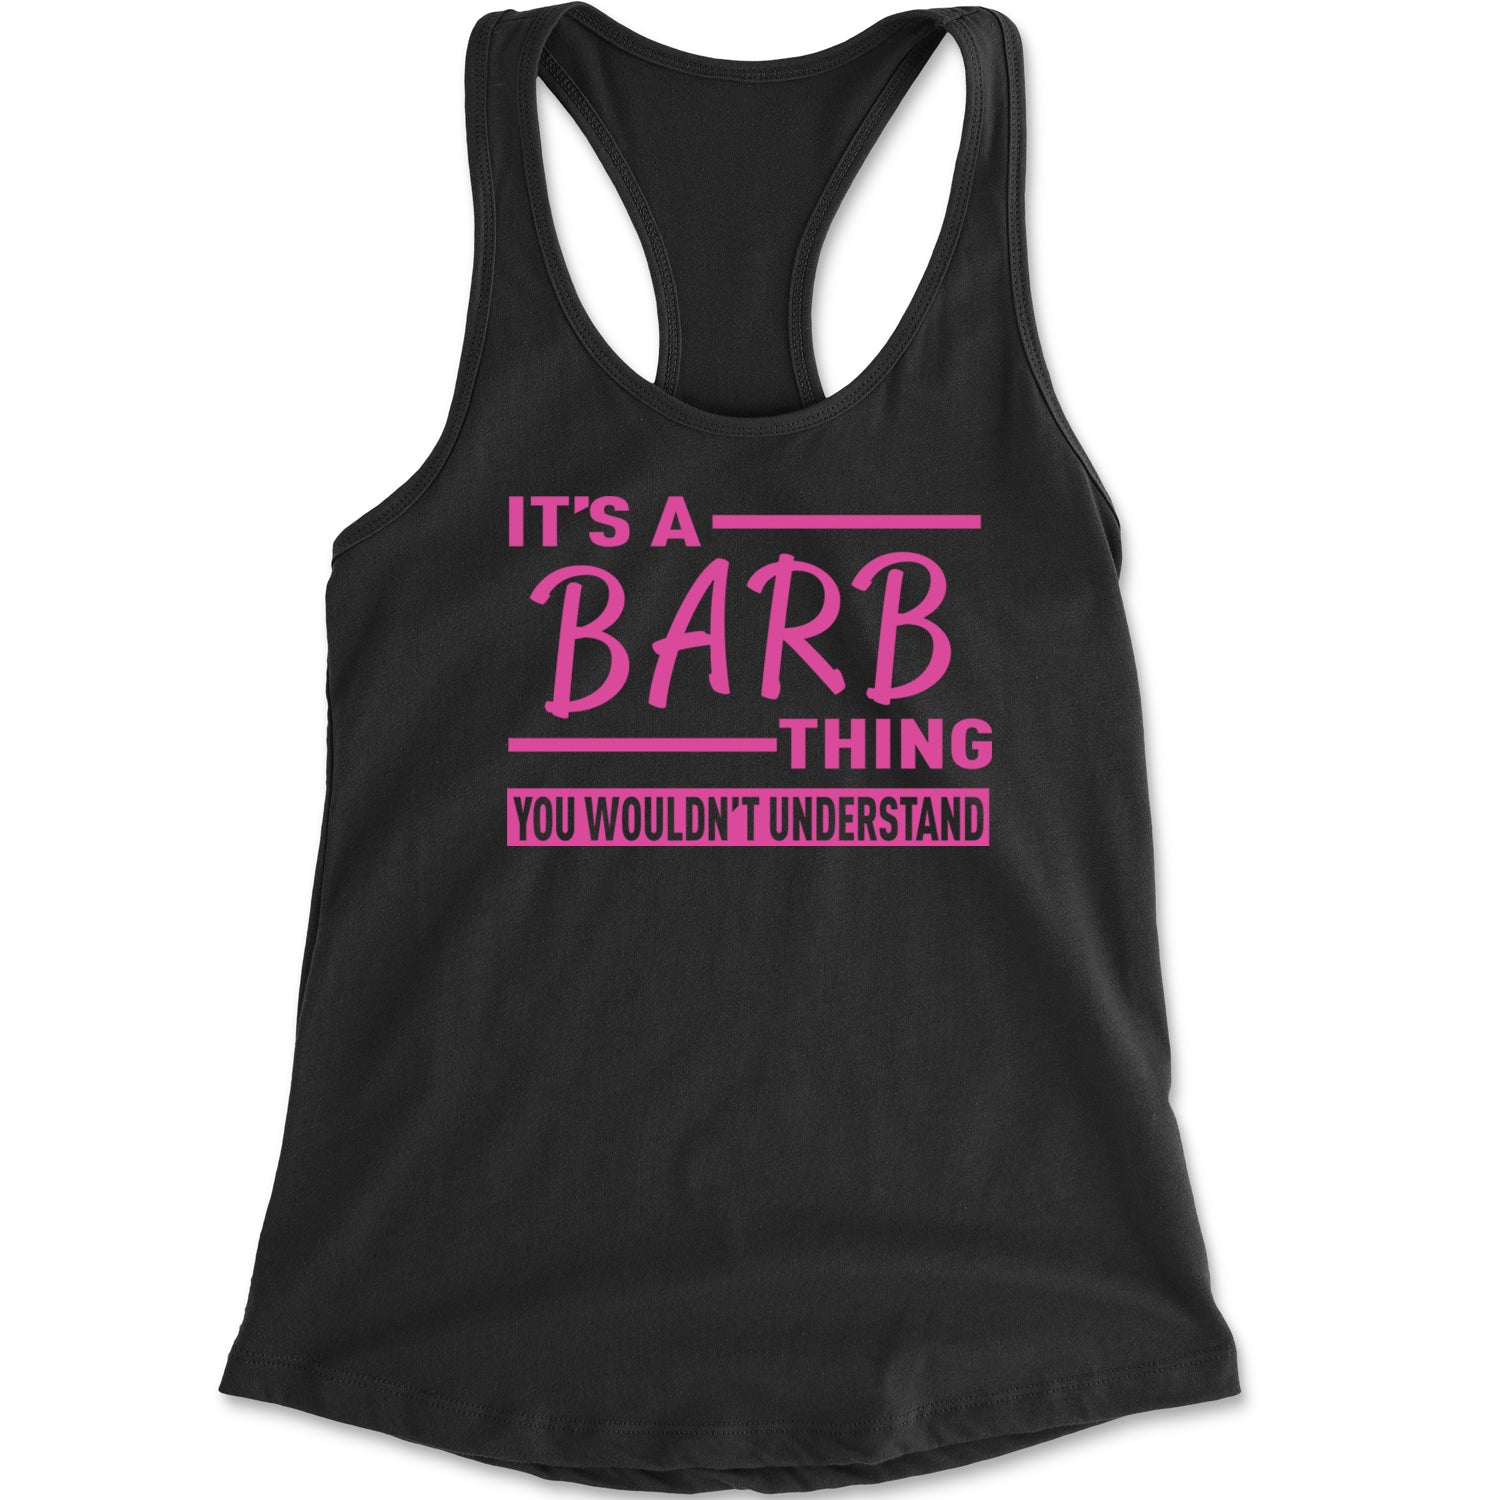 It's A Barb Thing, You Wouldn't Understand Racerback Tank Top for Women